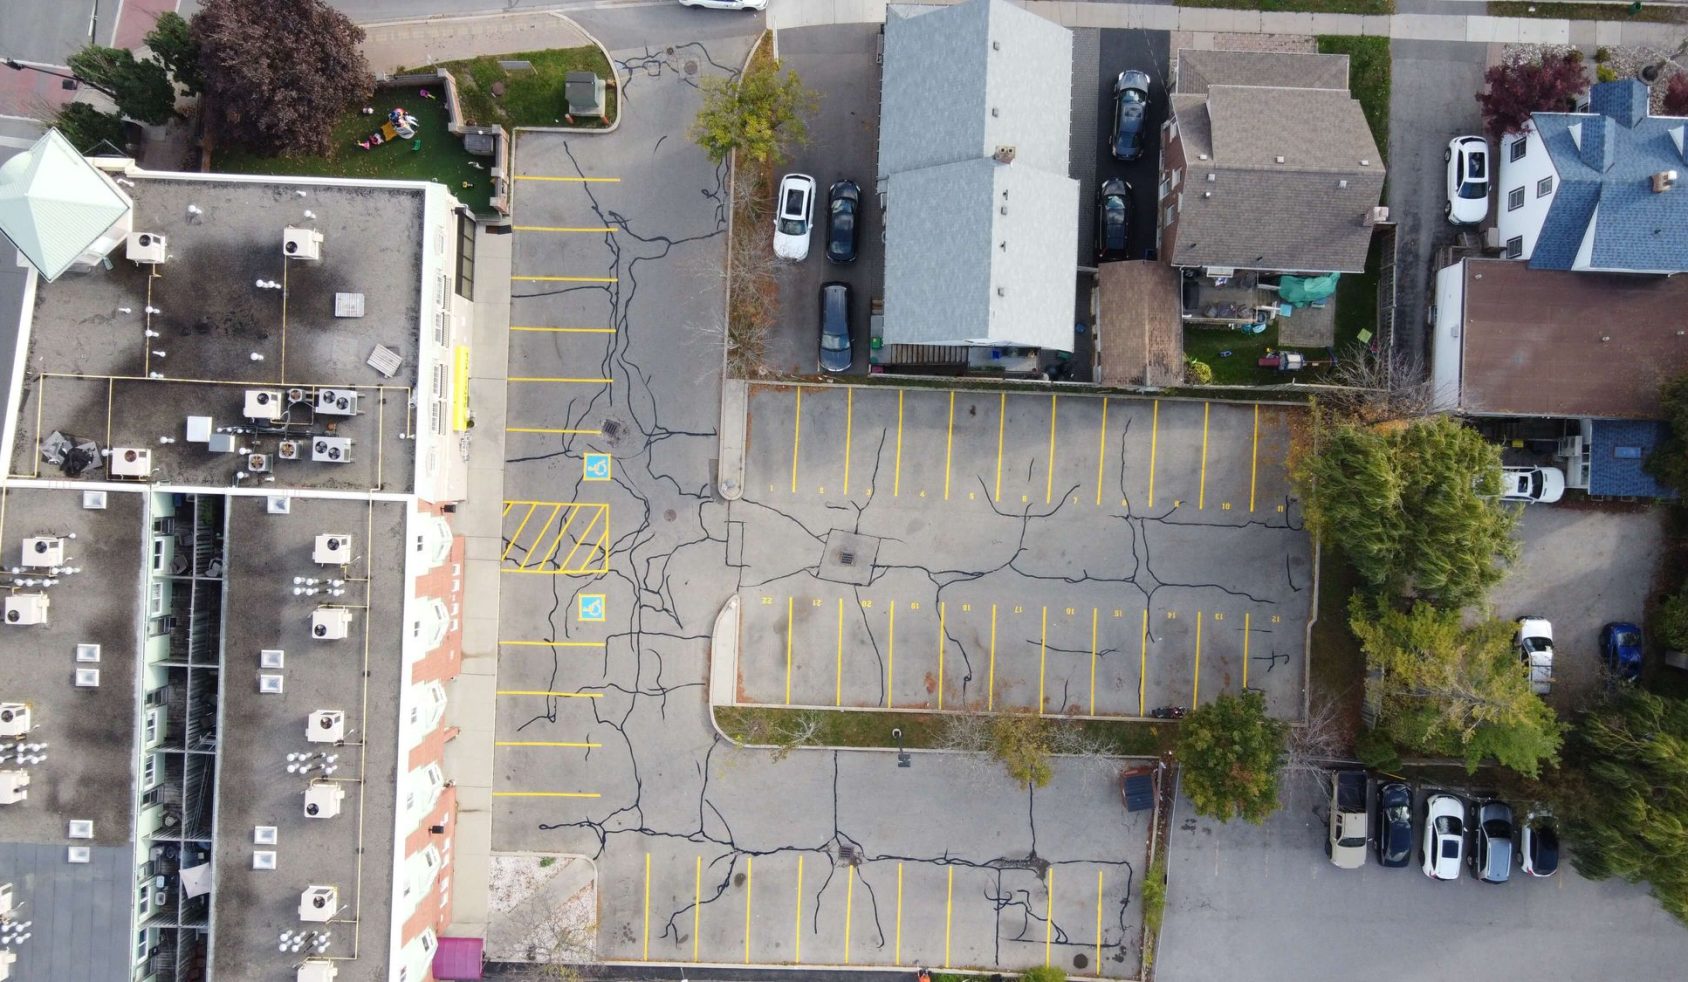 commercial lot line marking rexdale